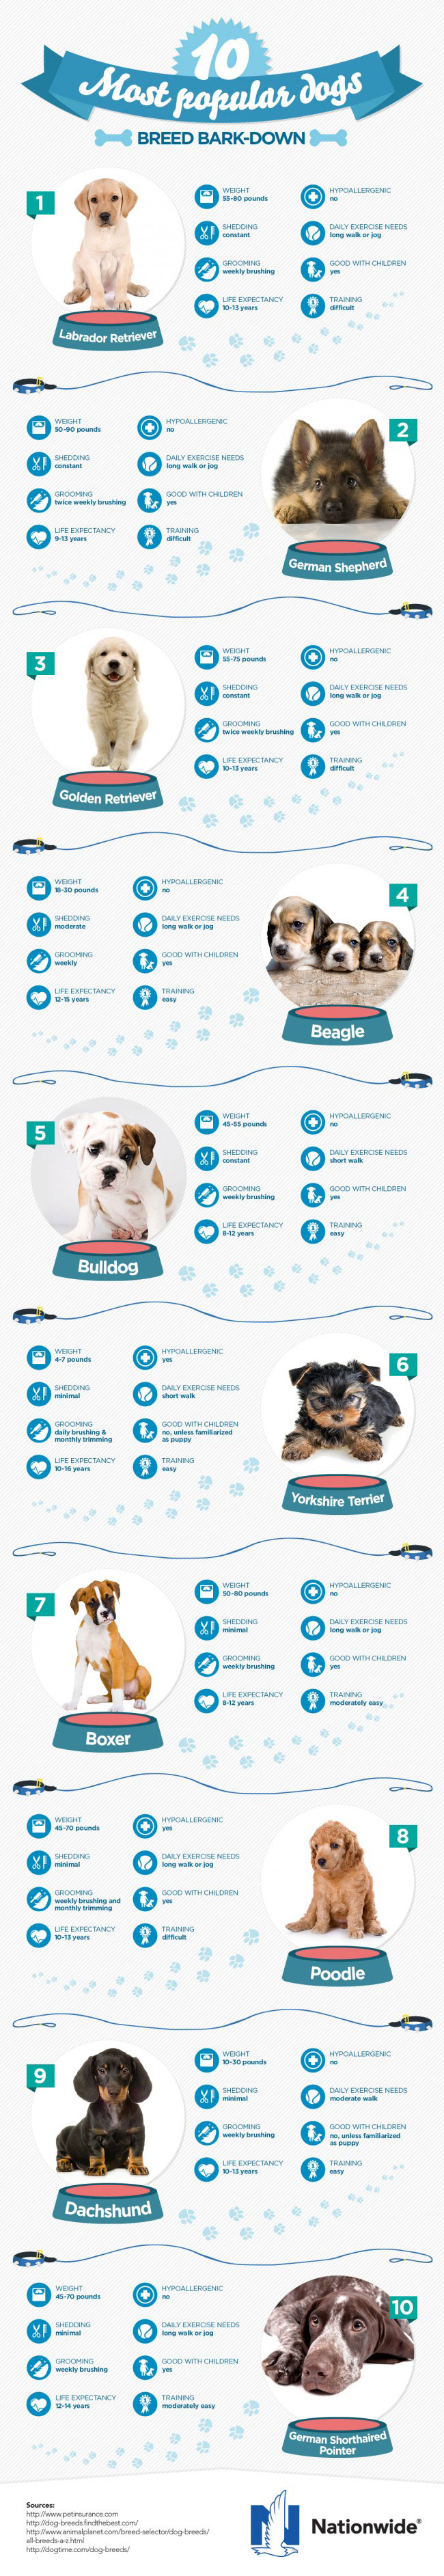 most-popular-dogs